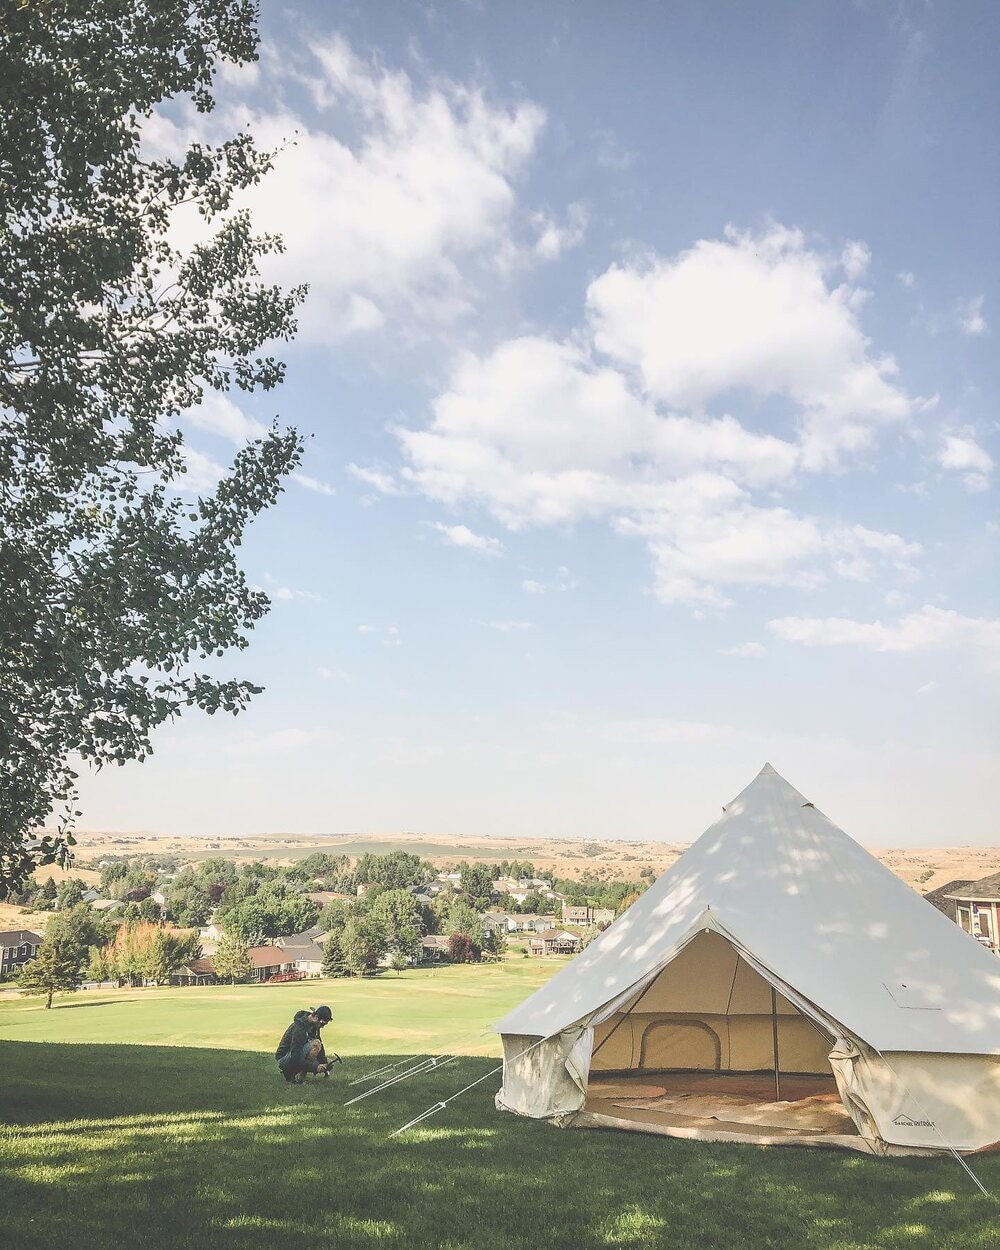 Family-Friendly Glamping Tents!